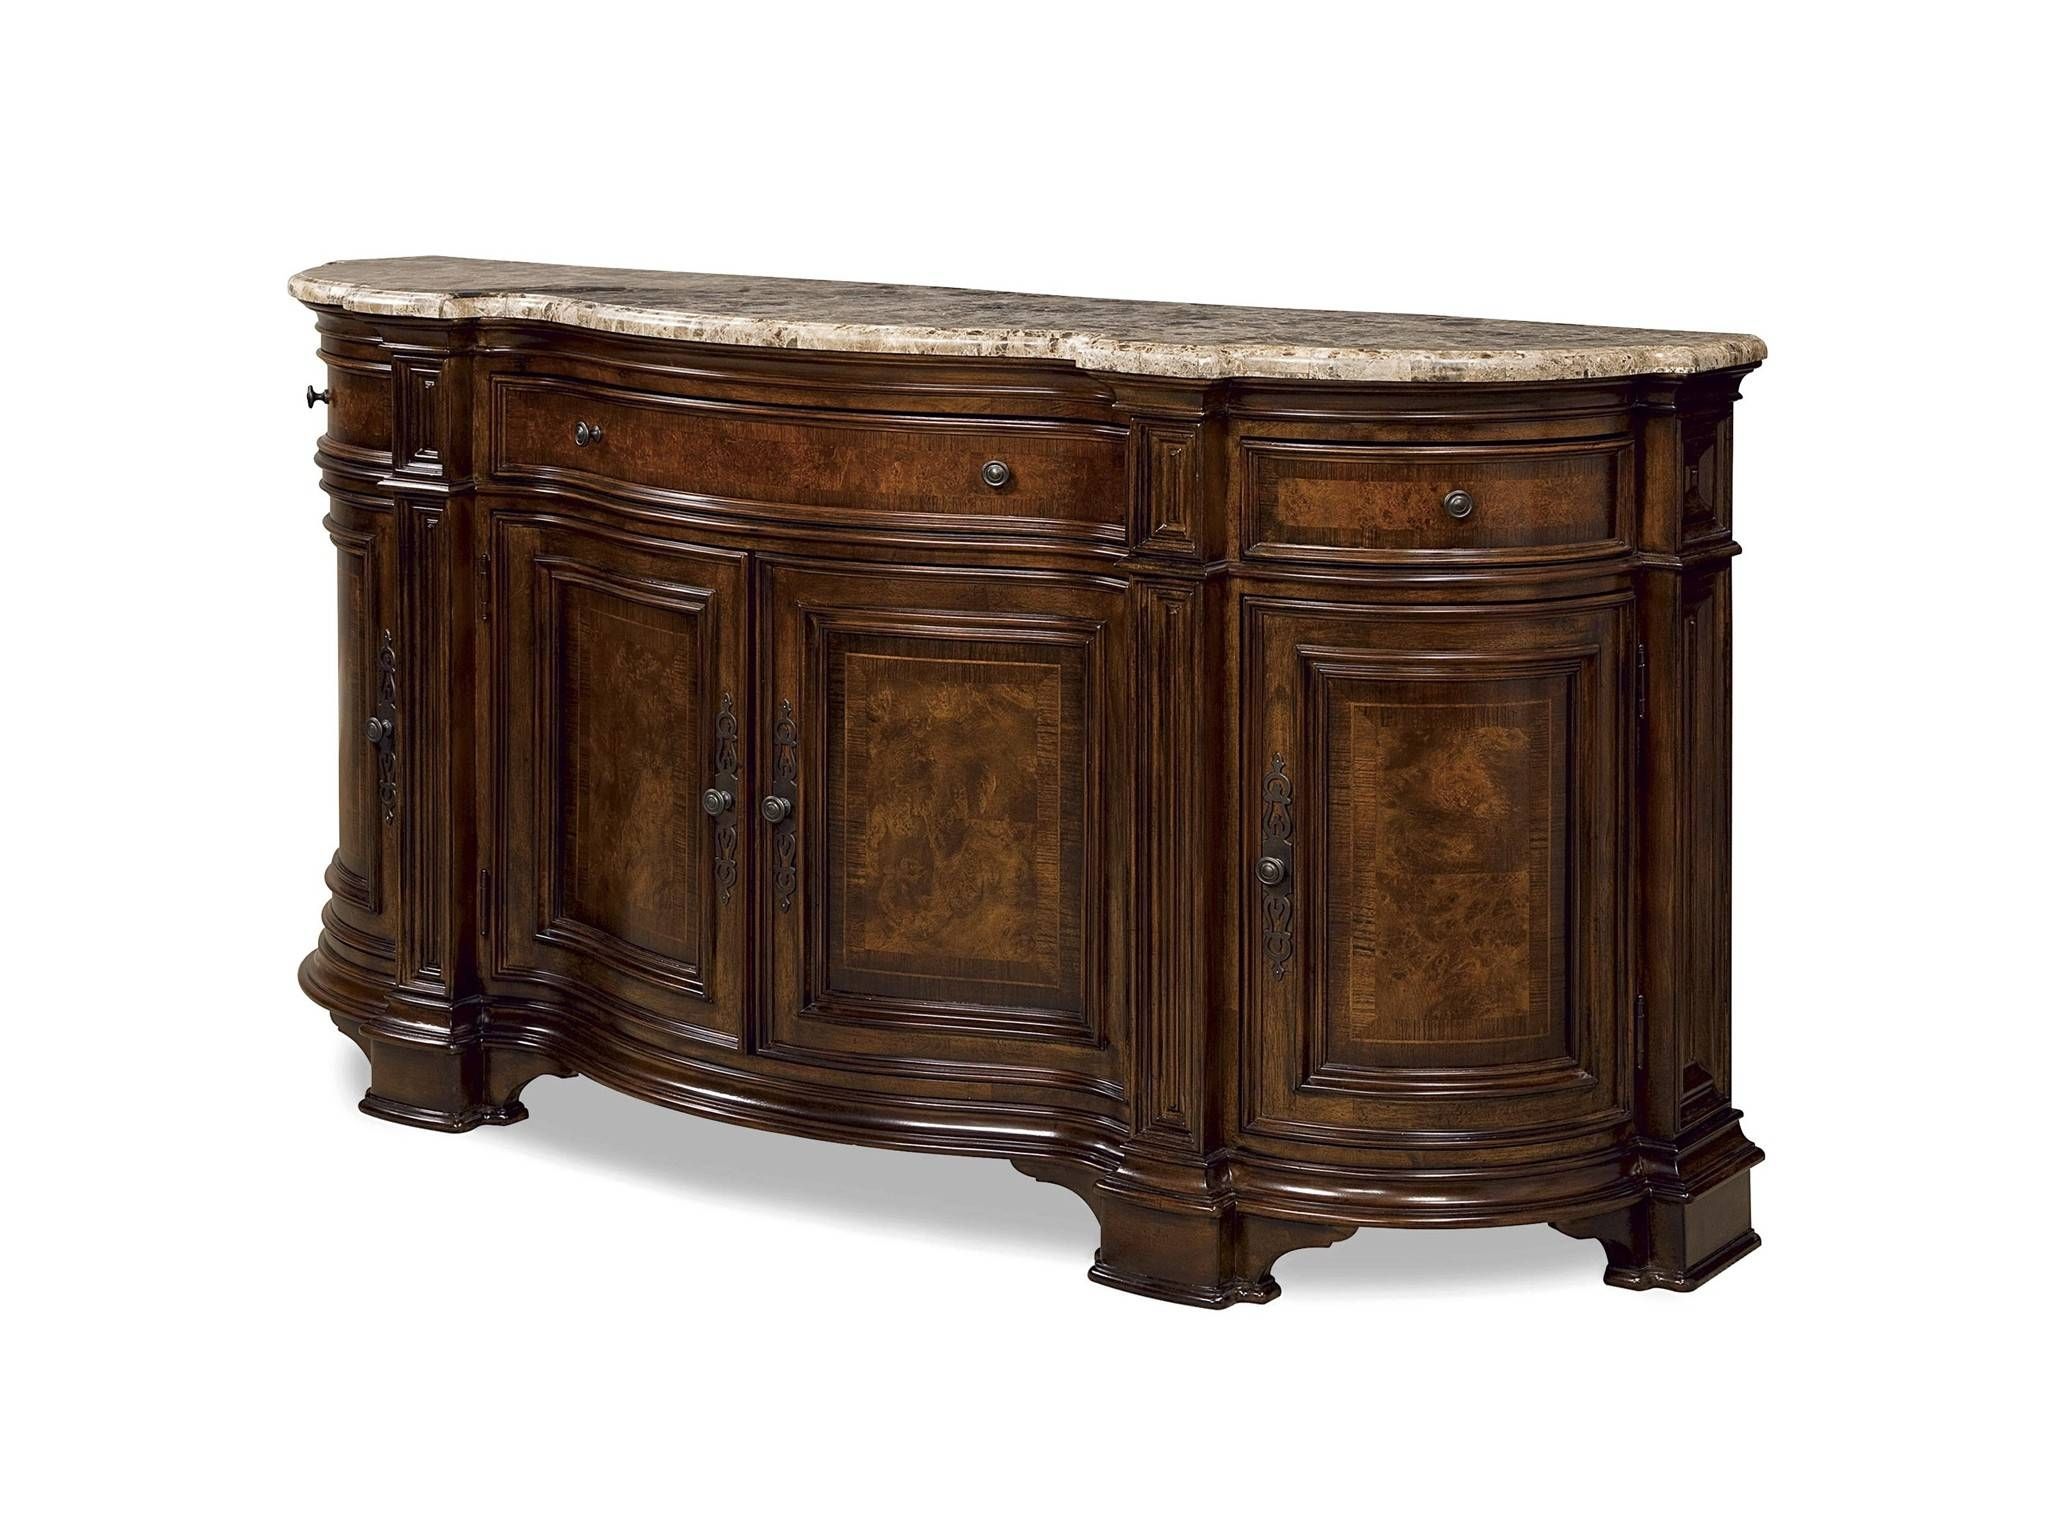 Buy Villa Cortina Sideboard Credenza With Marble Topuniversal Throughout Latest Sideboards With Marble Tops (View 3 of 15)